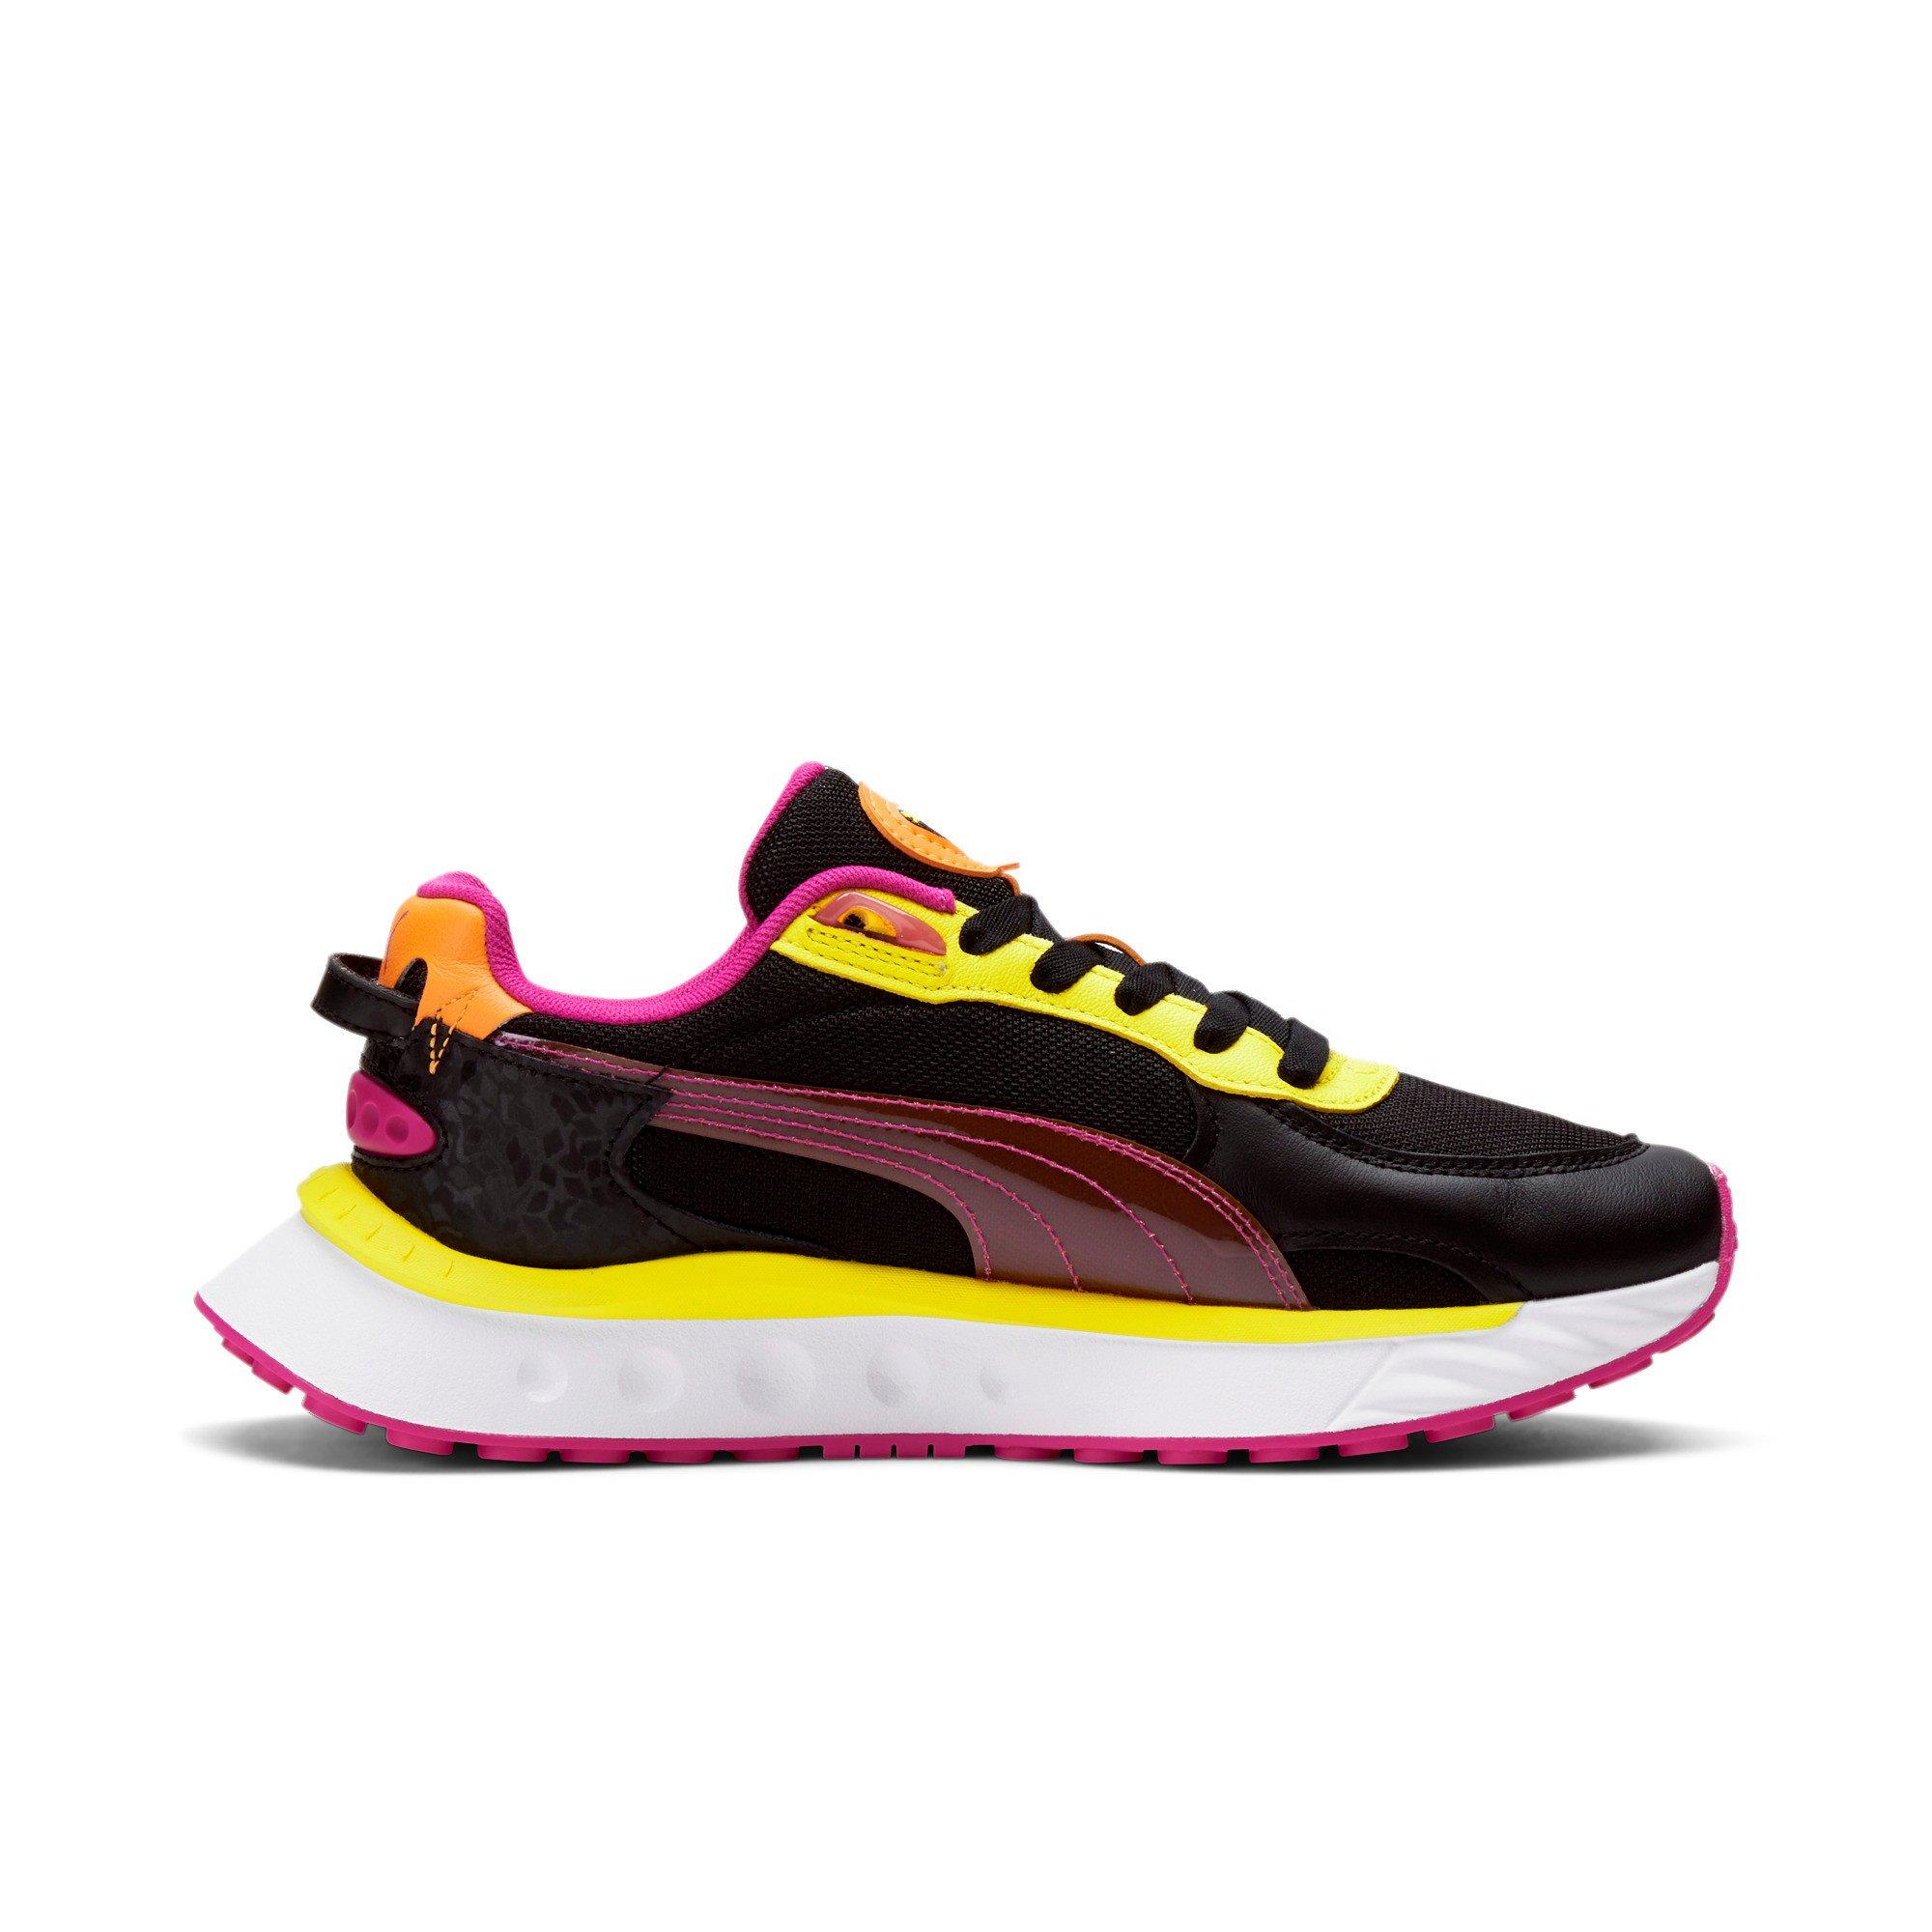 Buy Puma Multi Unisex Rs-X Toys Sneakers Online at Regal Shoes